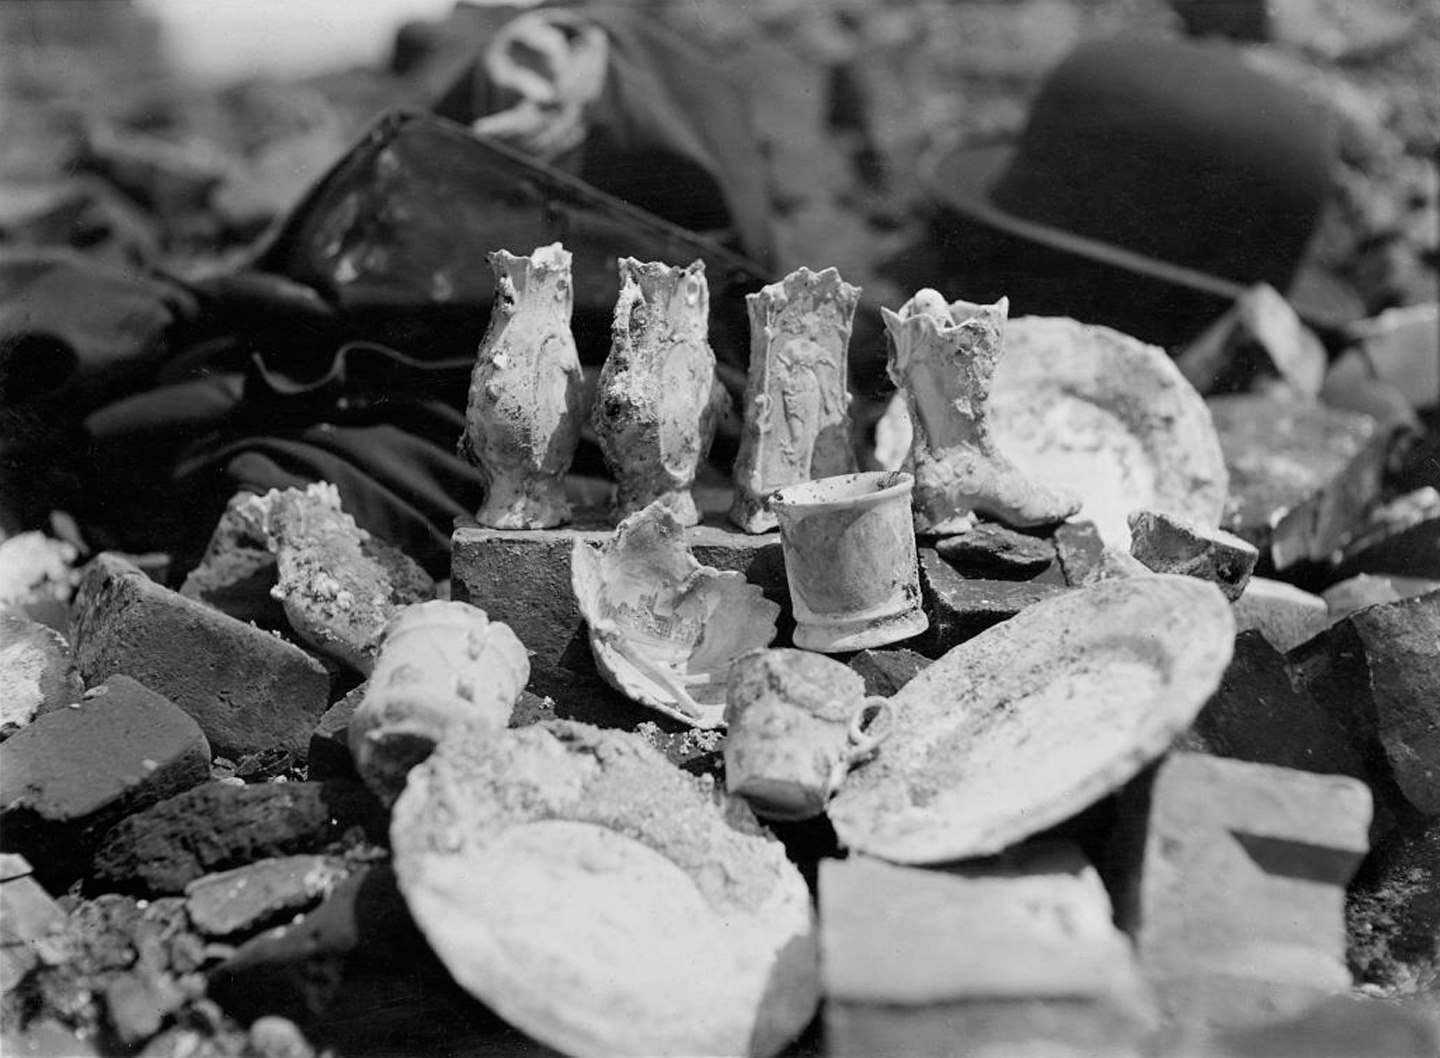 Pottery recovered from ruins of the Great Toronto Fire of 1904.